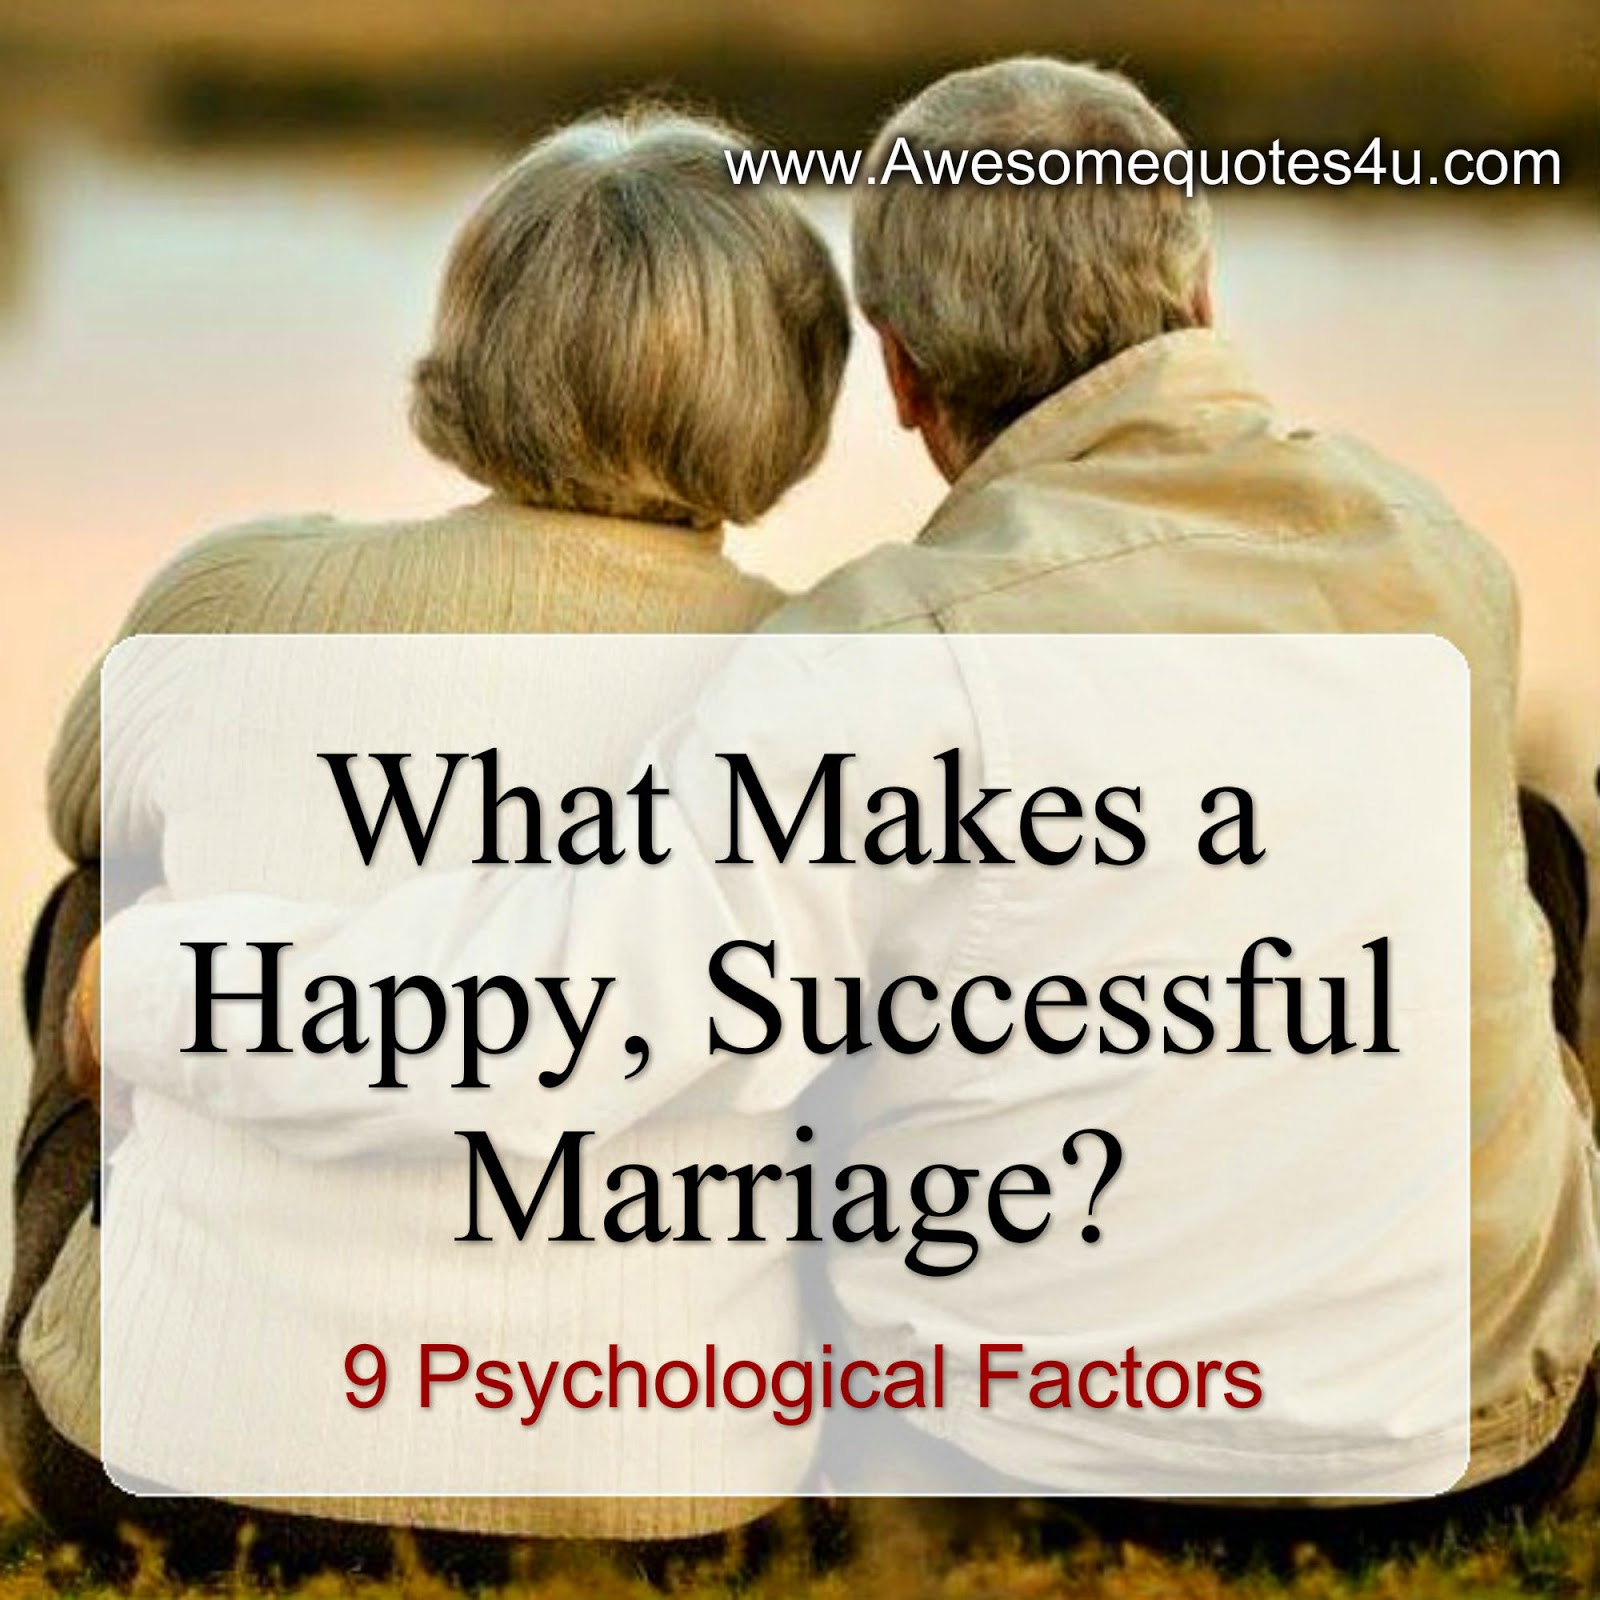 Awesome Quotes: What Makes a Happy, Successful Marriage? 9